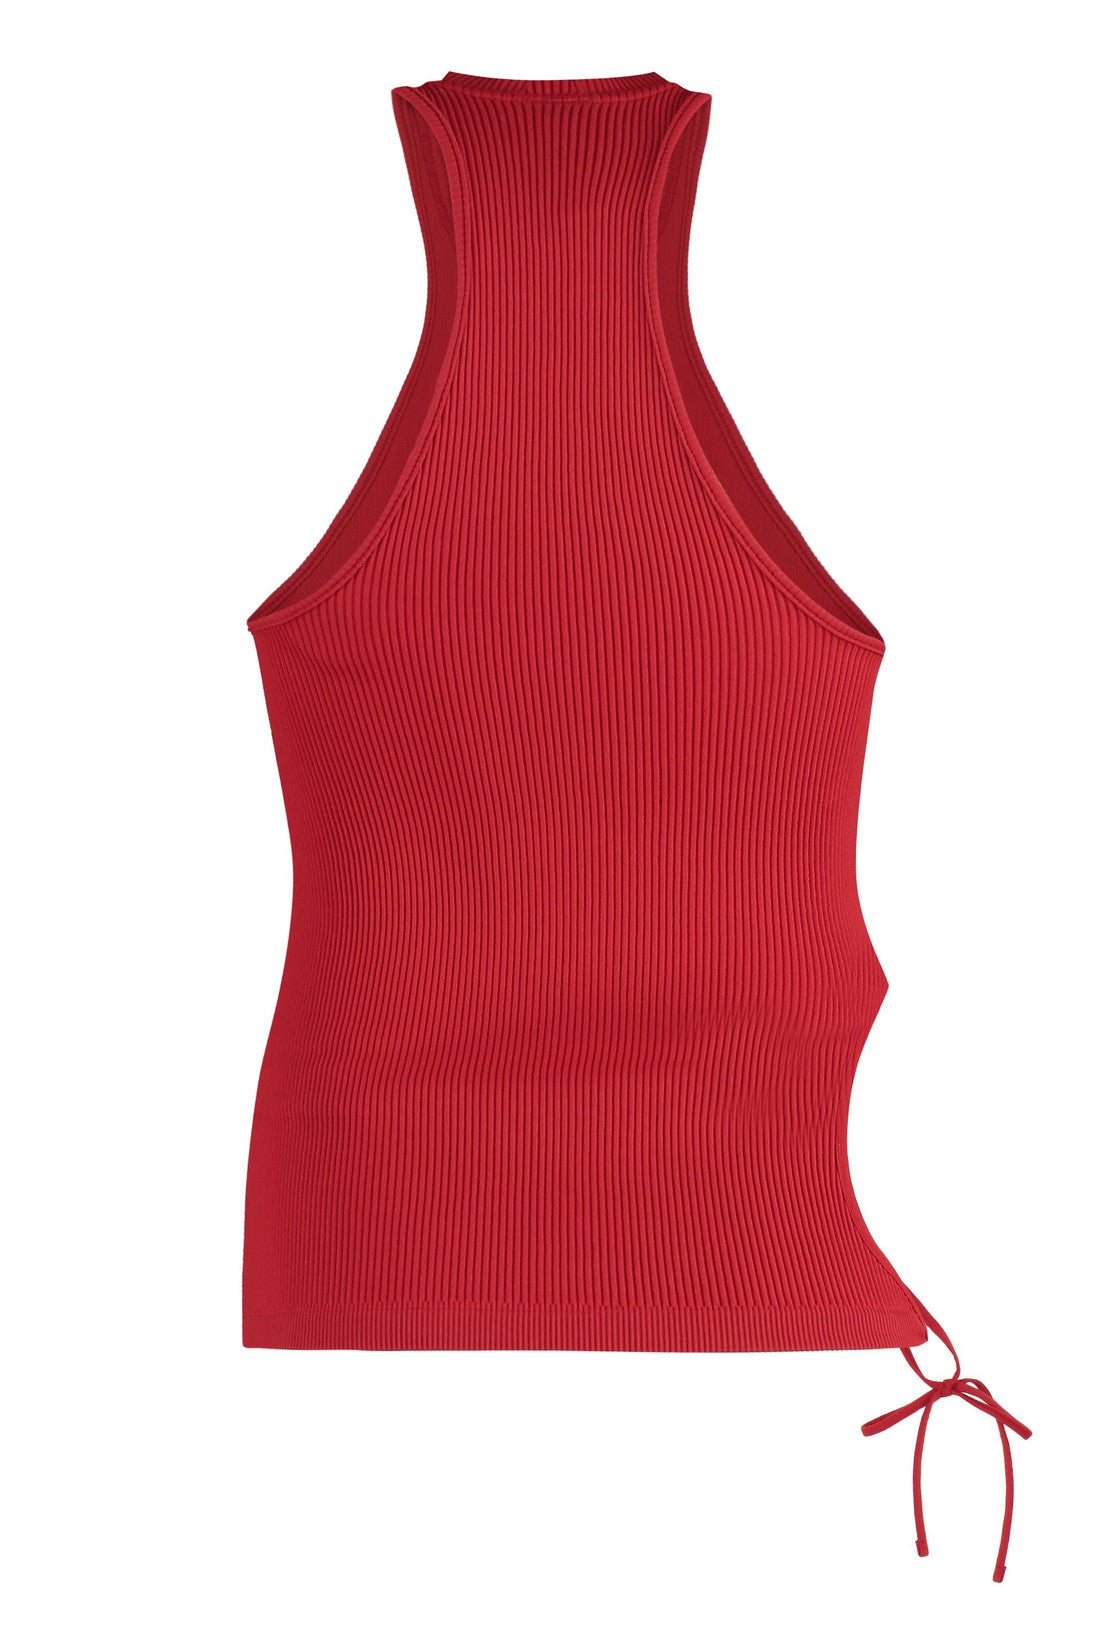 ANDREADAMO-OUTLET-SALE-Ribbed tank top-ARCHIVIST